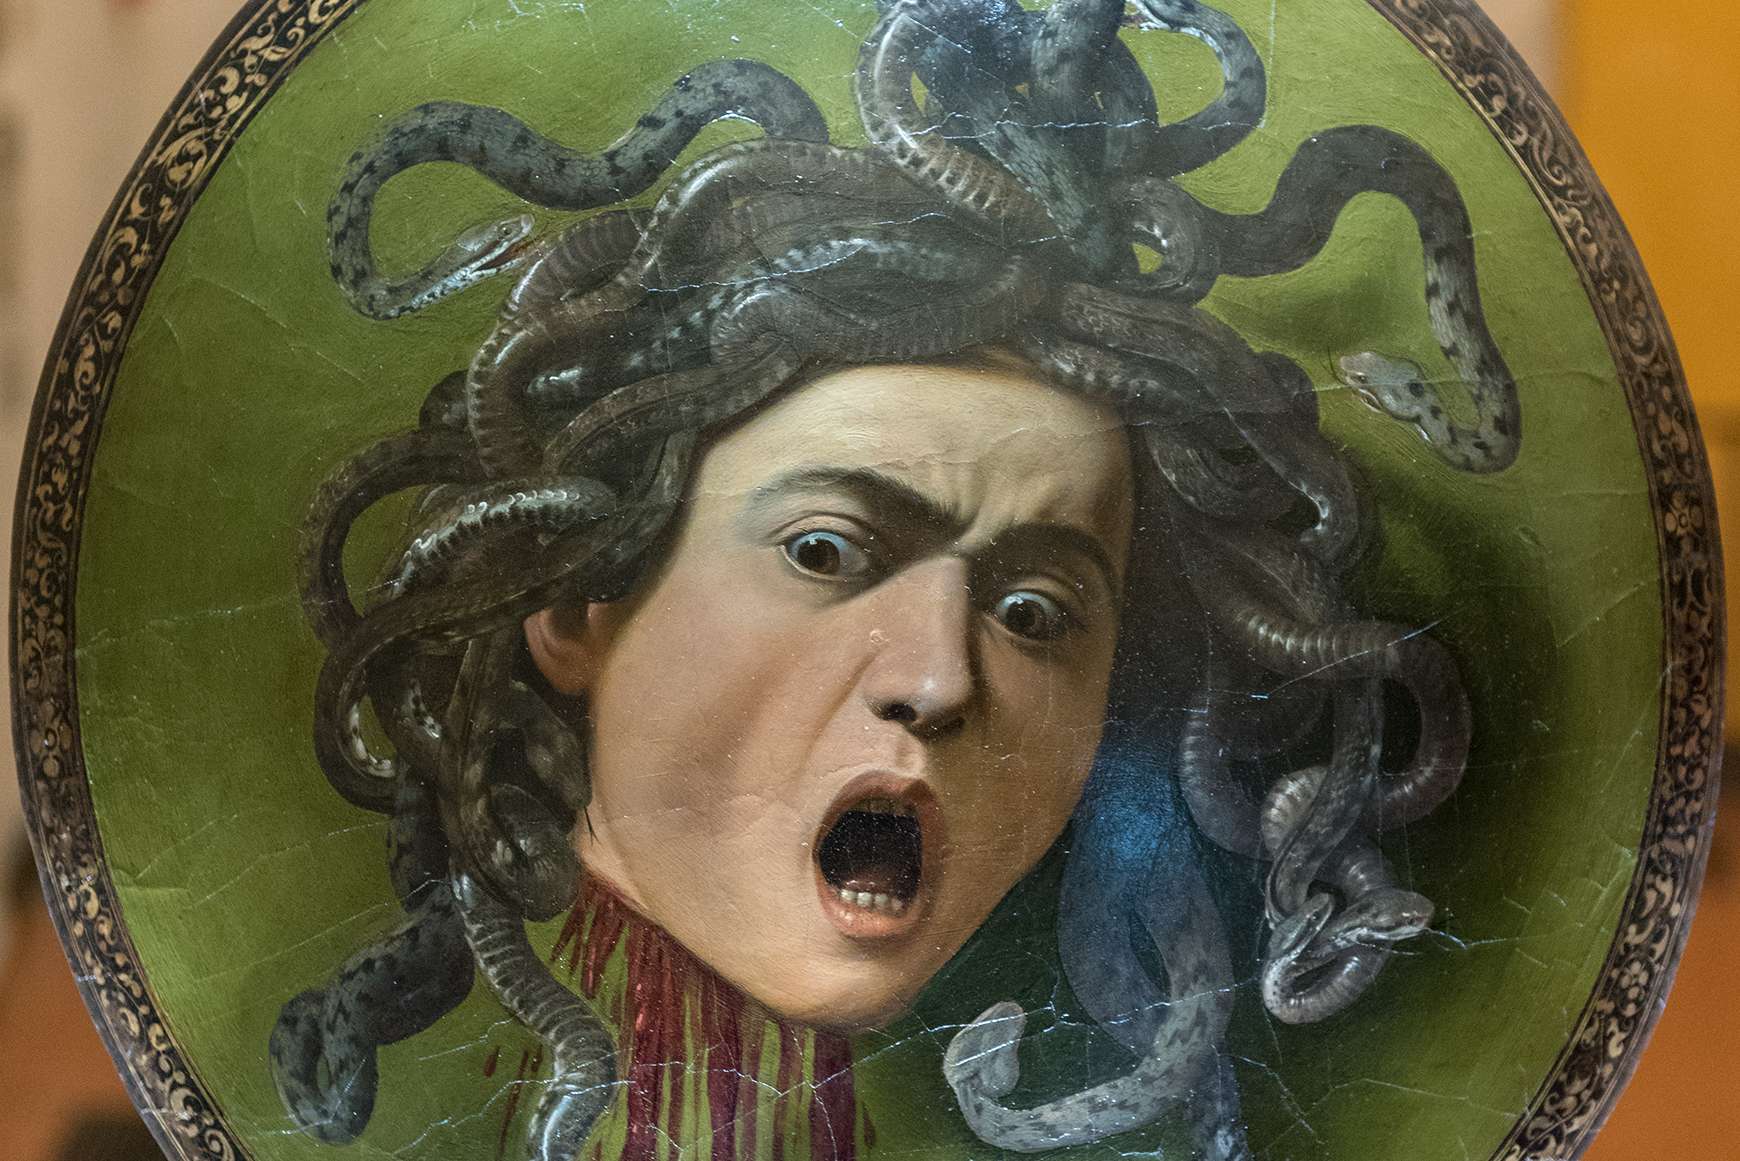 Face of Medusa with open mouth by Caravaggio. 